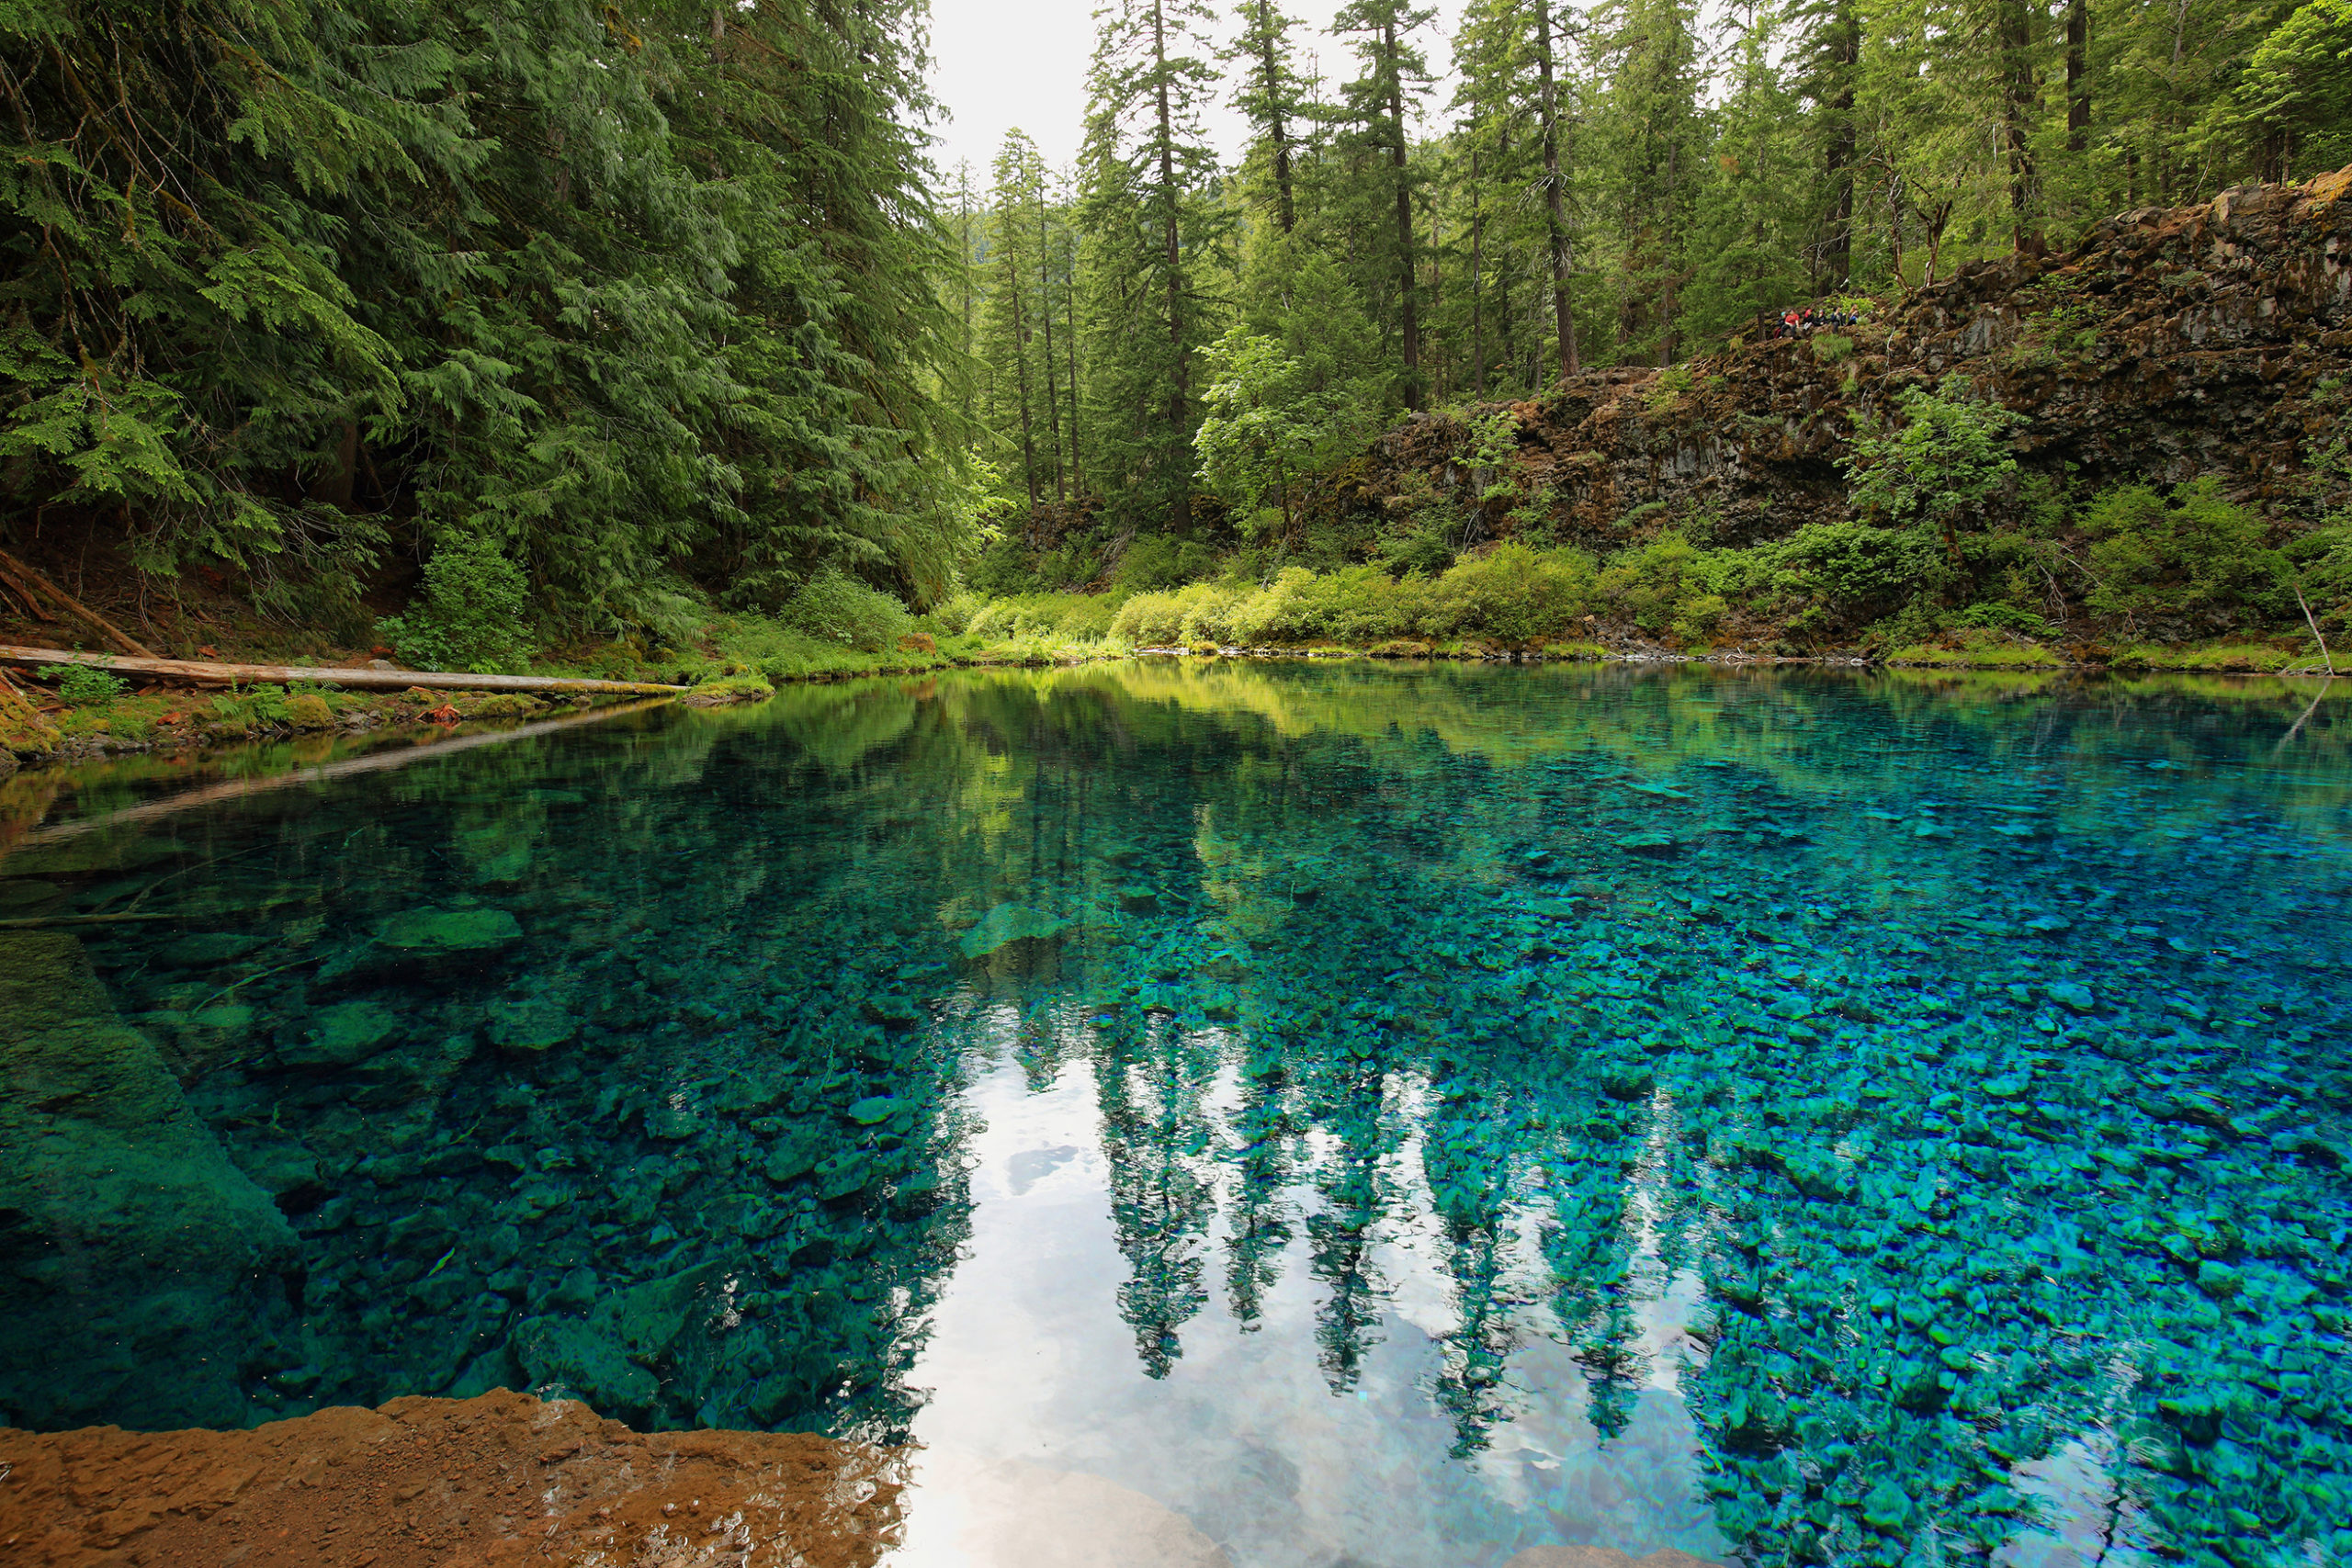 Lookout Fire Prompts Temporary Closure of Oregon’s Beloved Blue Pool